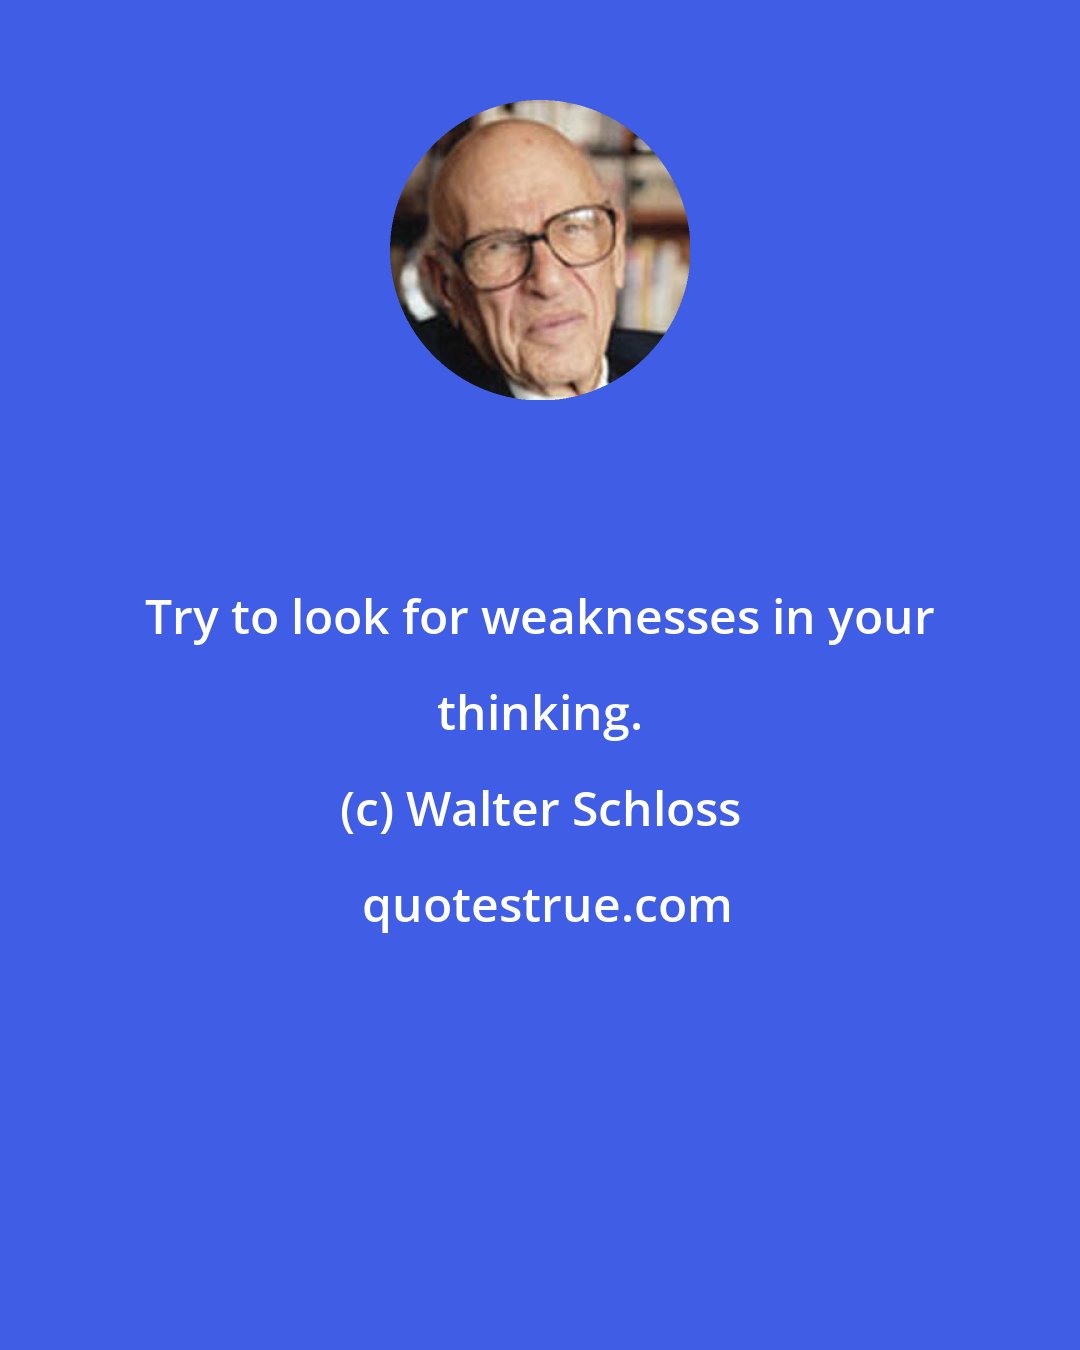 Walter Schloss: Try to look for weaknesses in your thinking.